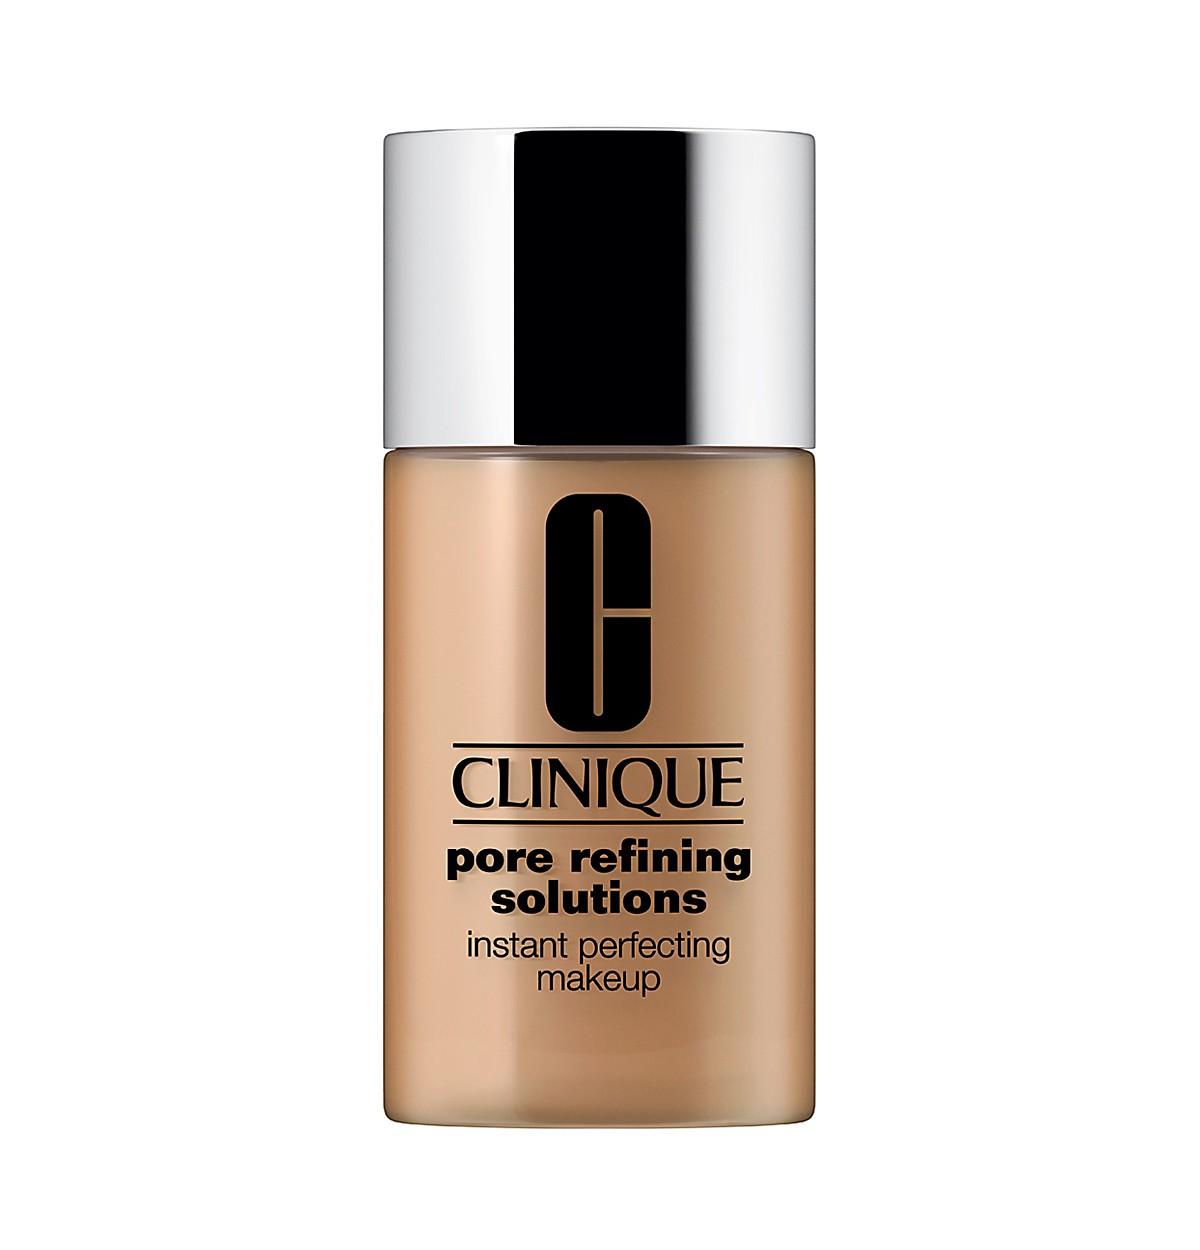 Foto Mujer Maquillaje Clinique Pore Refining Solutions Instant Perfecting